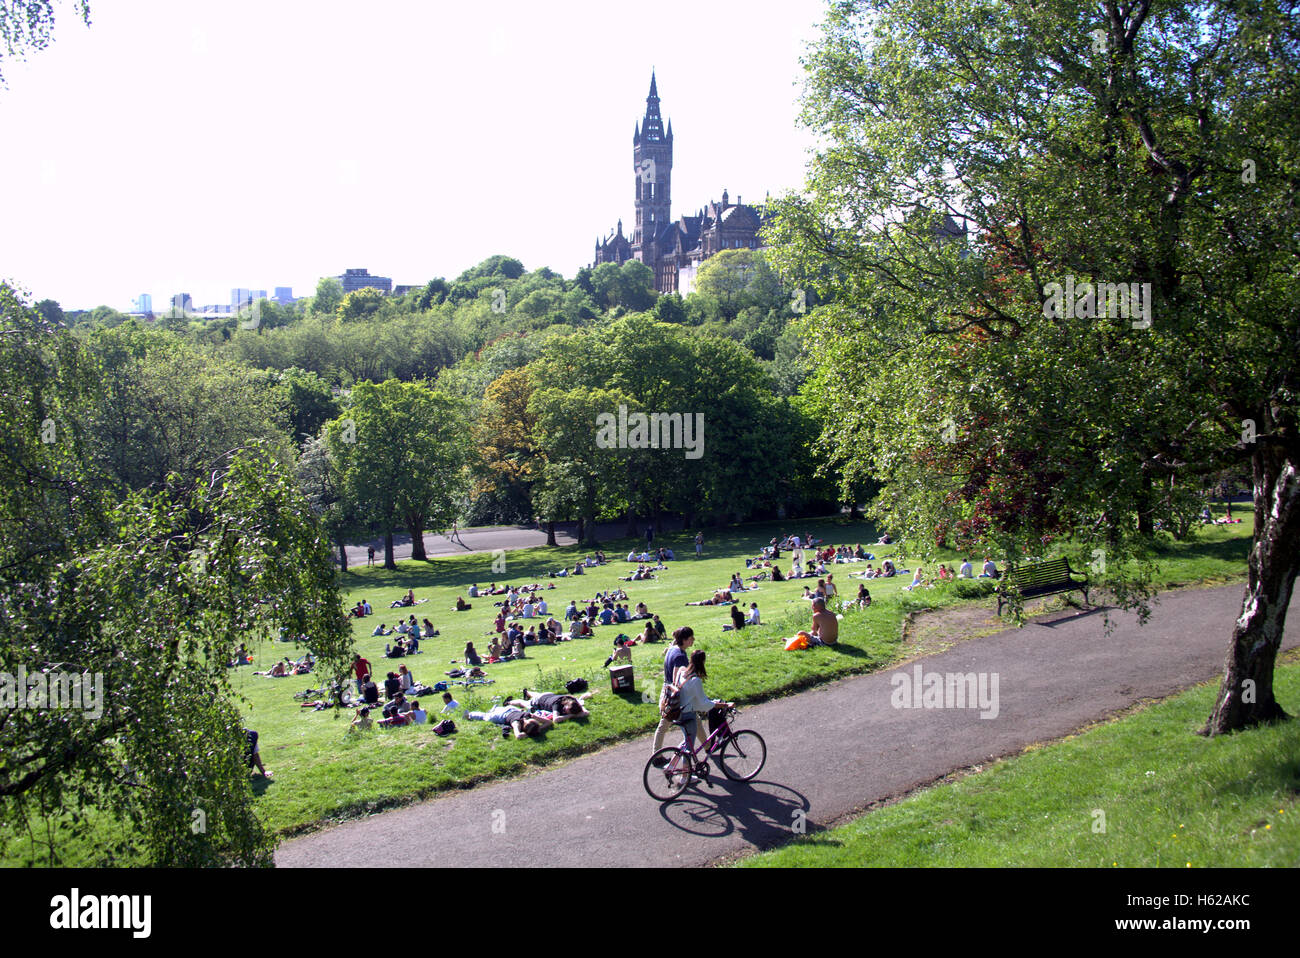 Glasgow kelvingrove  park which contains both the university and the museum in the Park area of the city's affluent west end Stock Photo